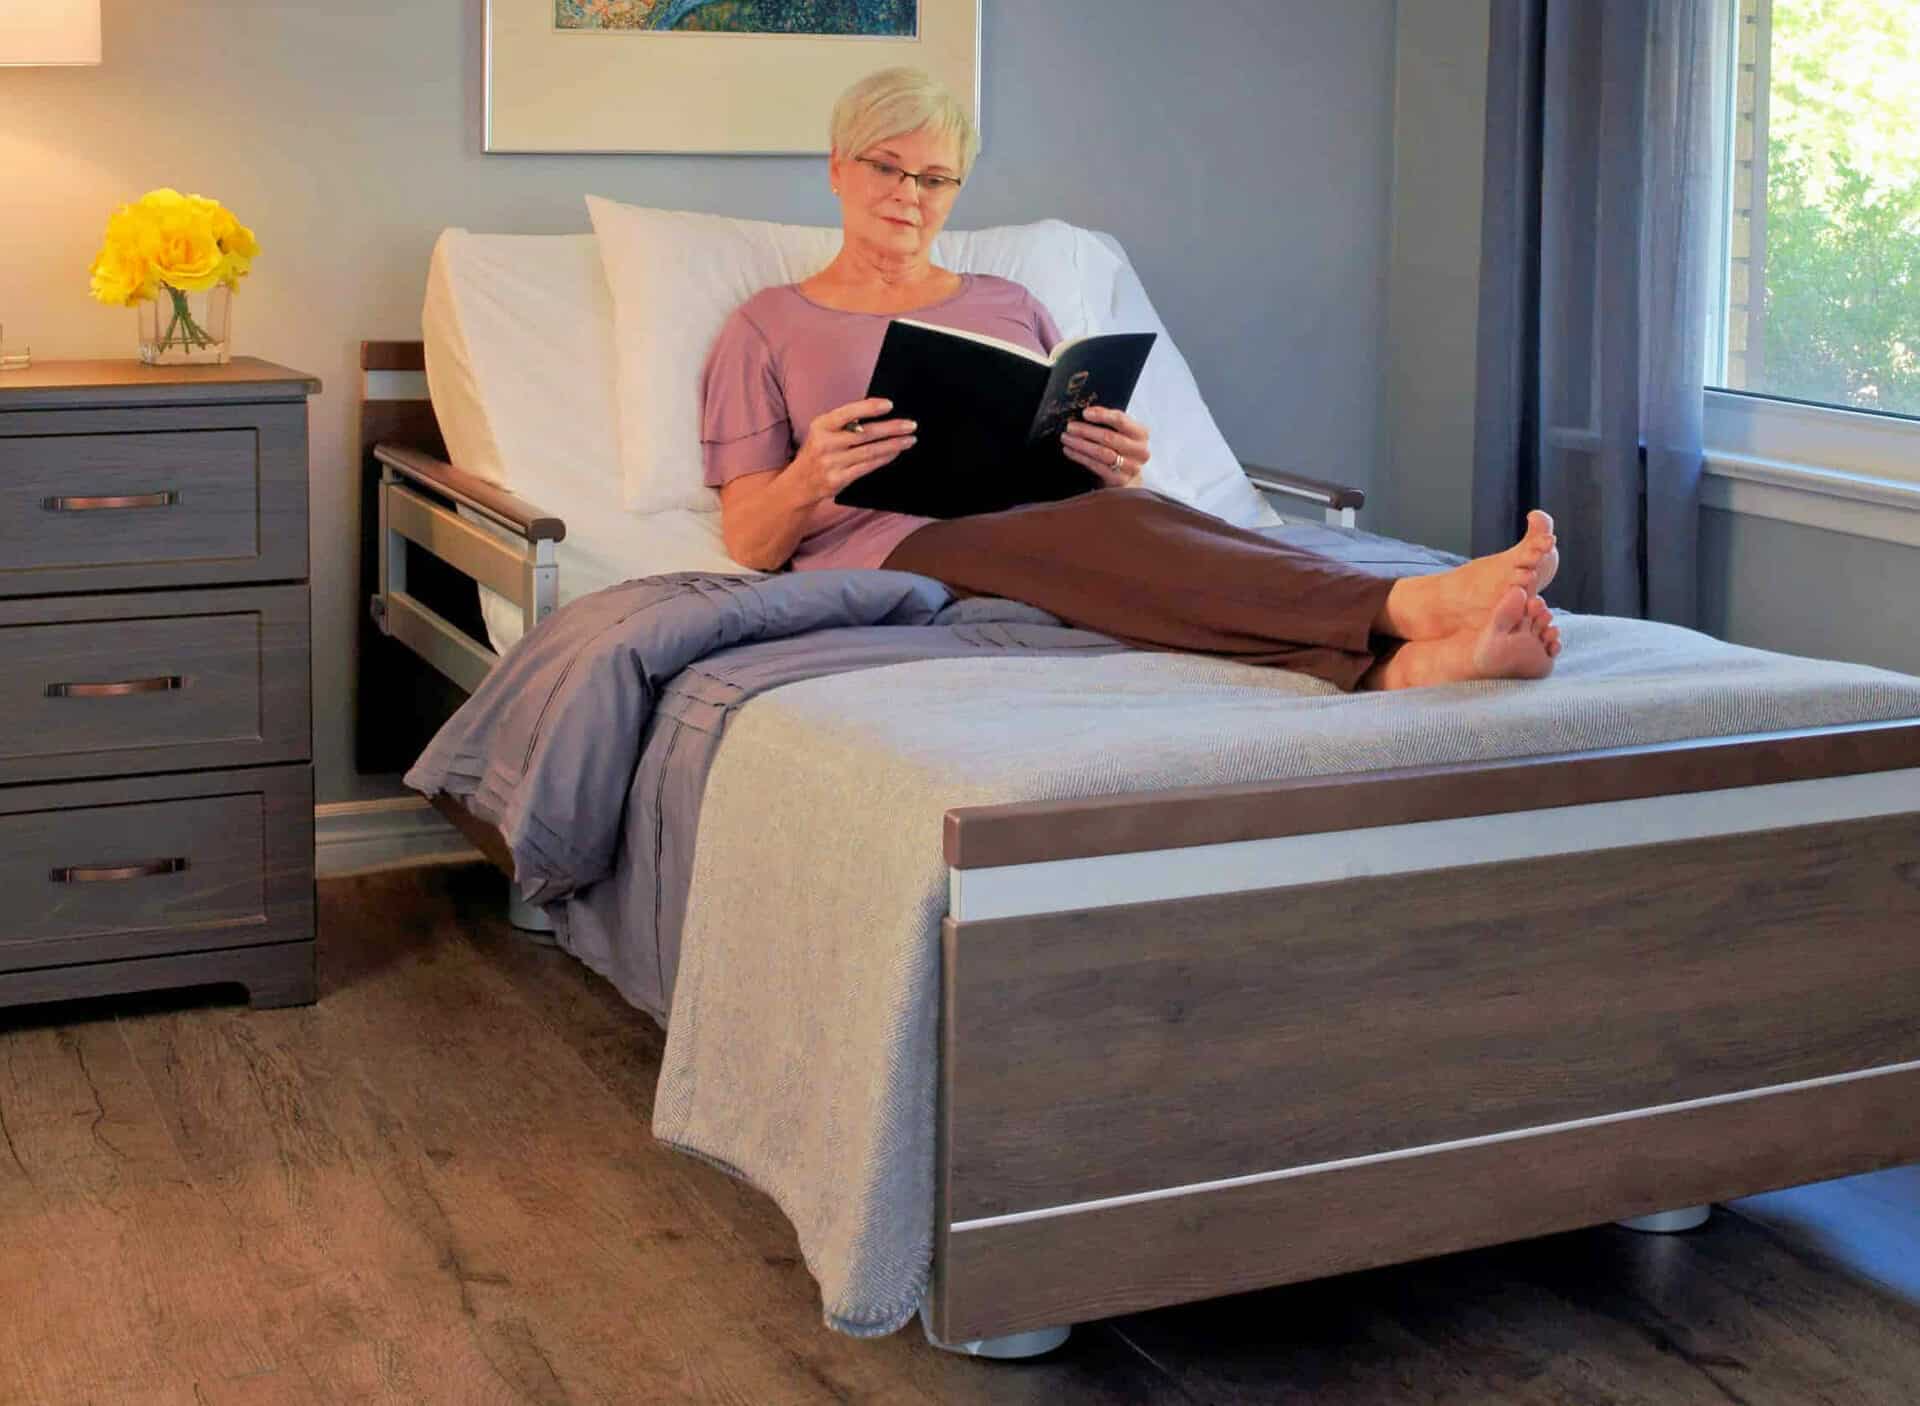 A woman is sitting on a bed reading a book.